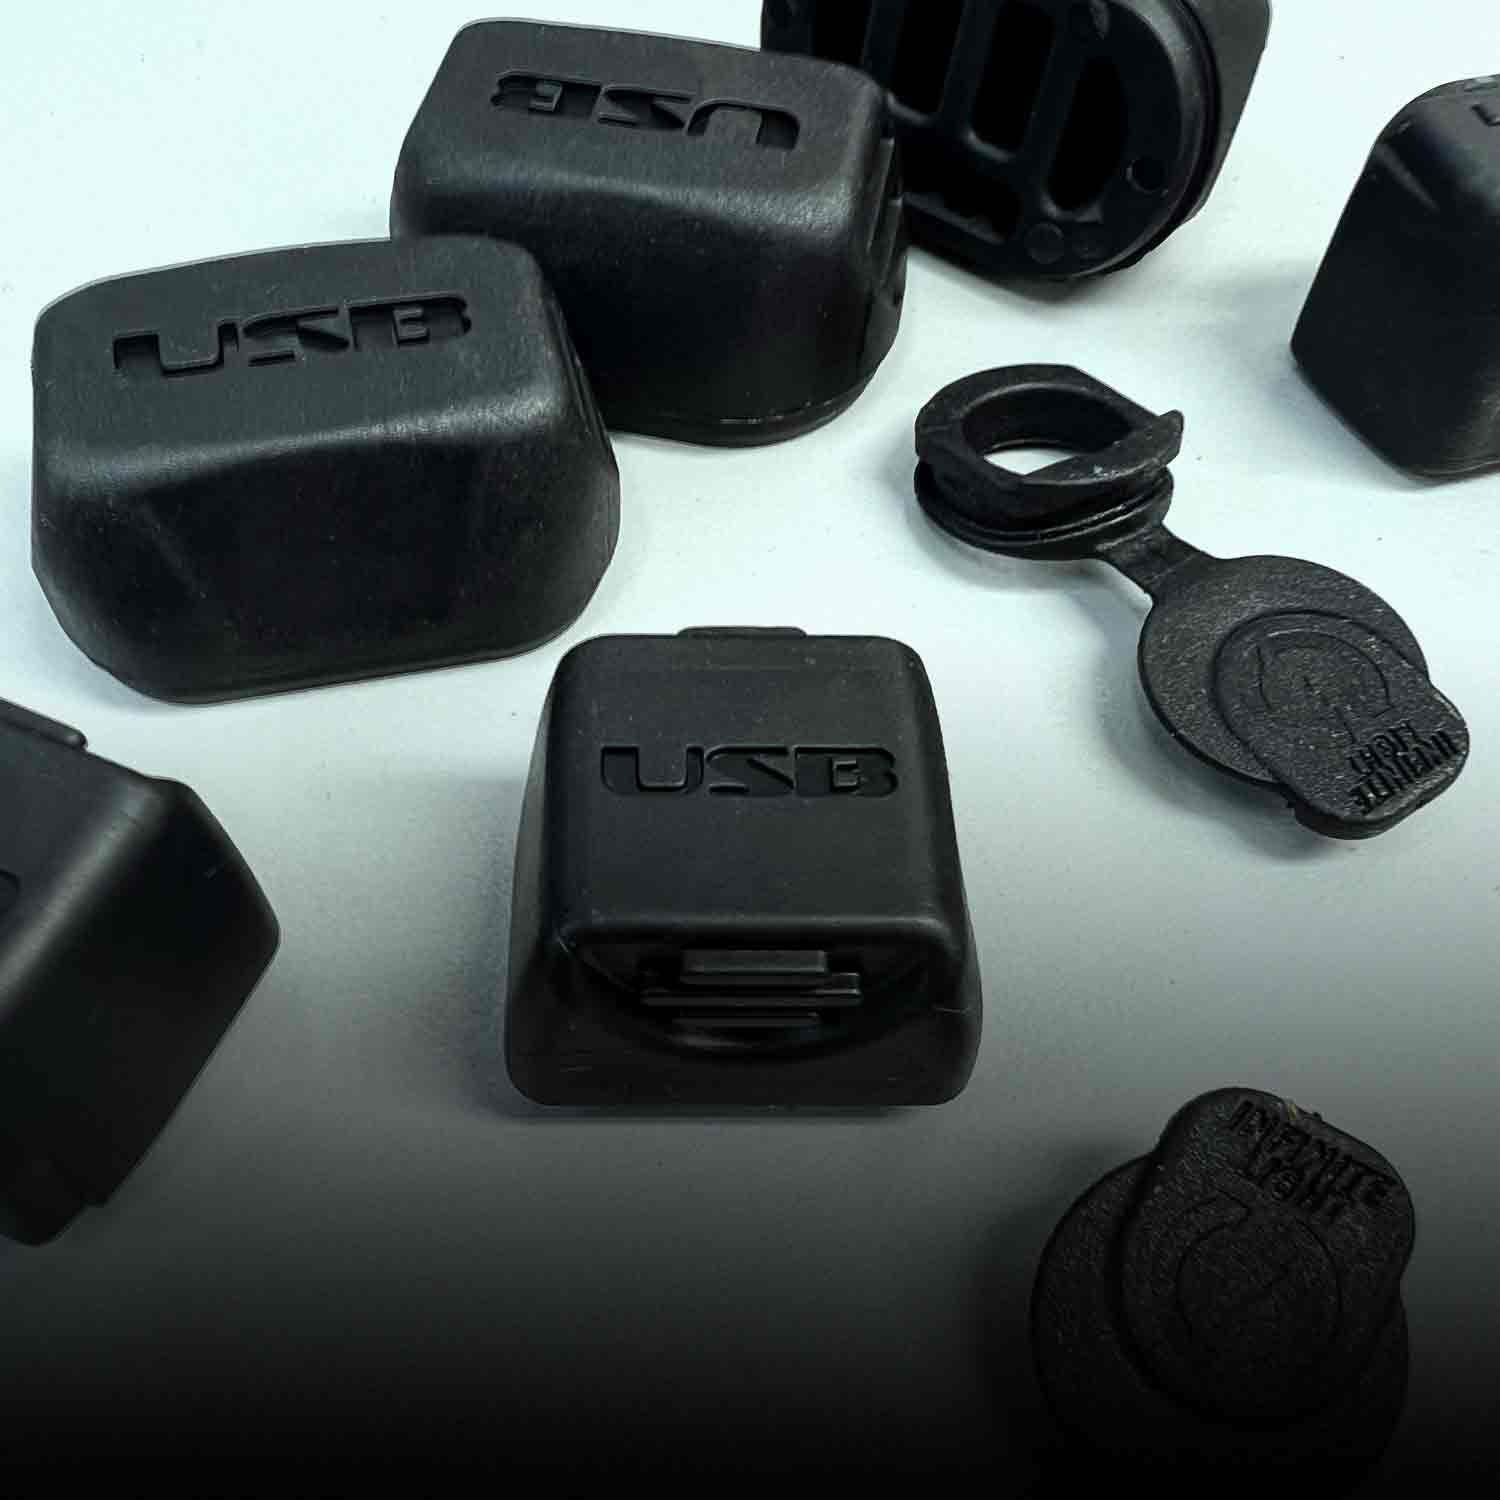 Several end caps with USB embossed on them 